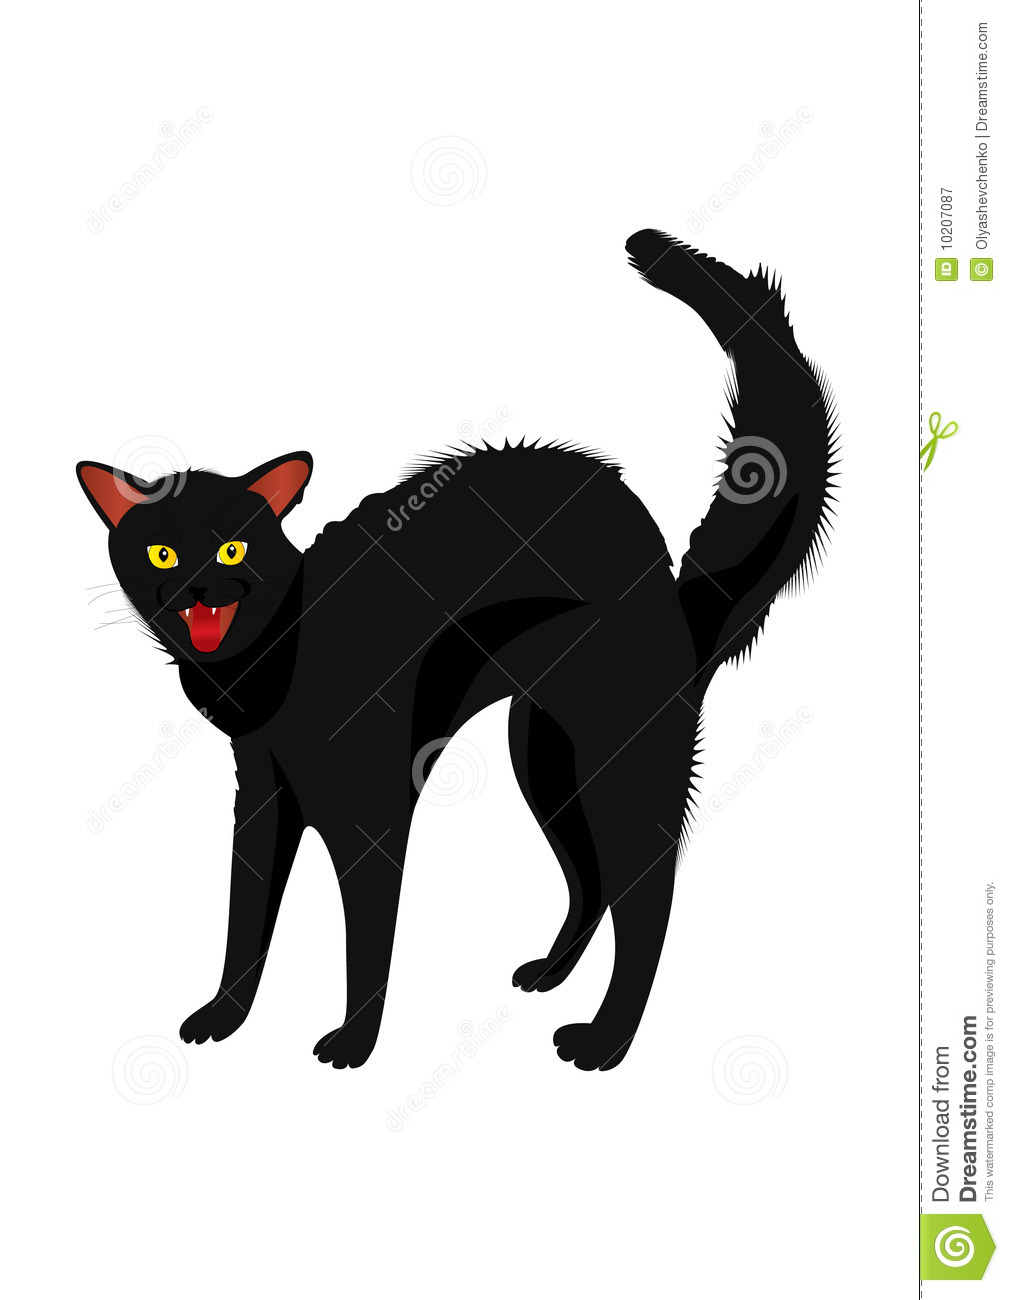 Hissing Cat Royalty Free Stock Photography   Image  10207087